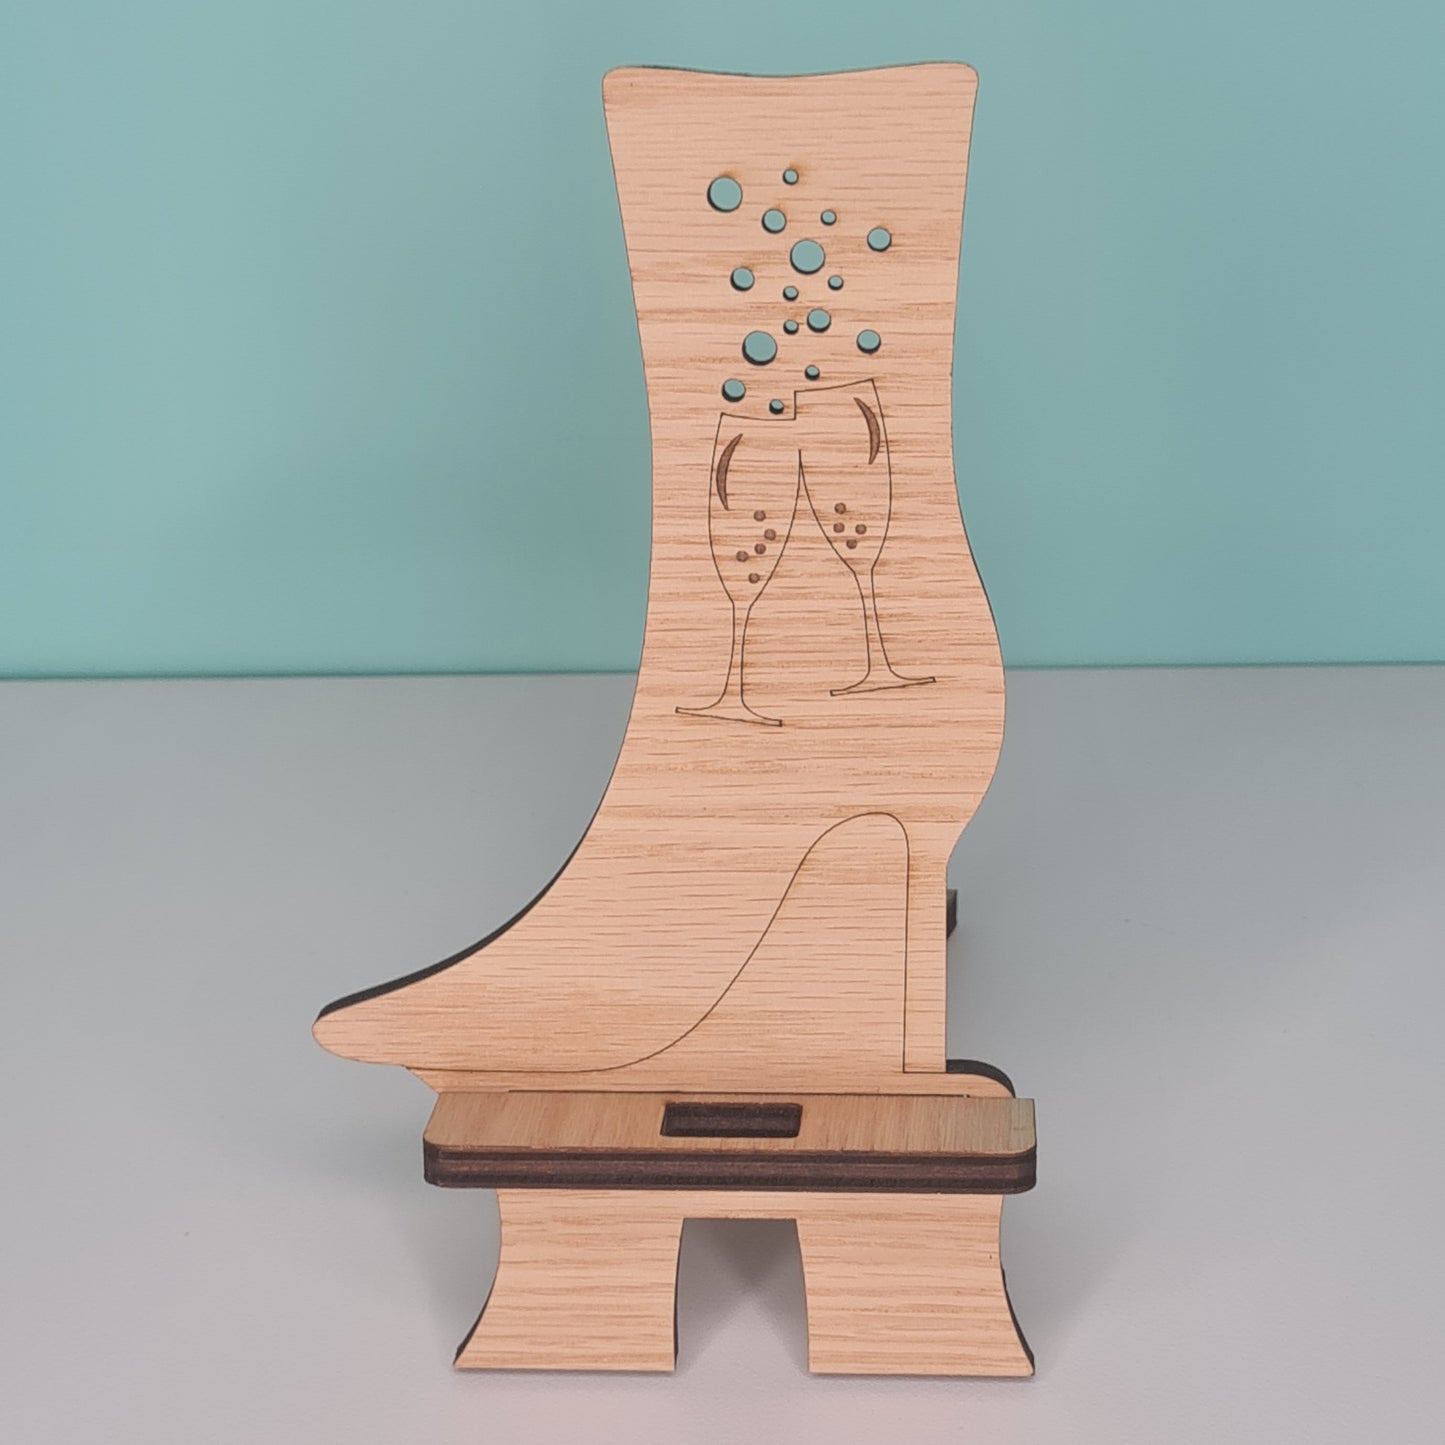 Boot and Champagne Mobile Phone Stand